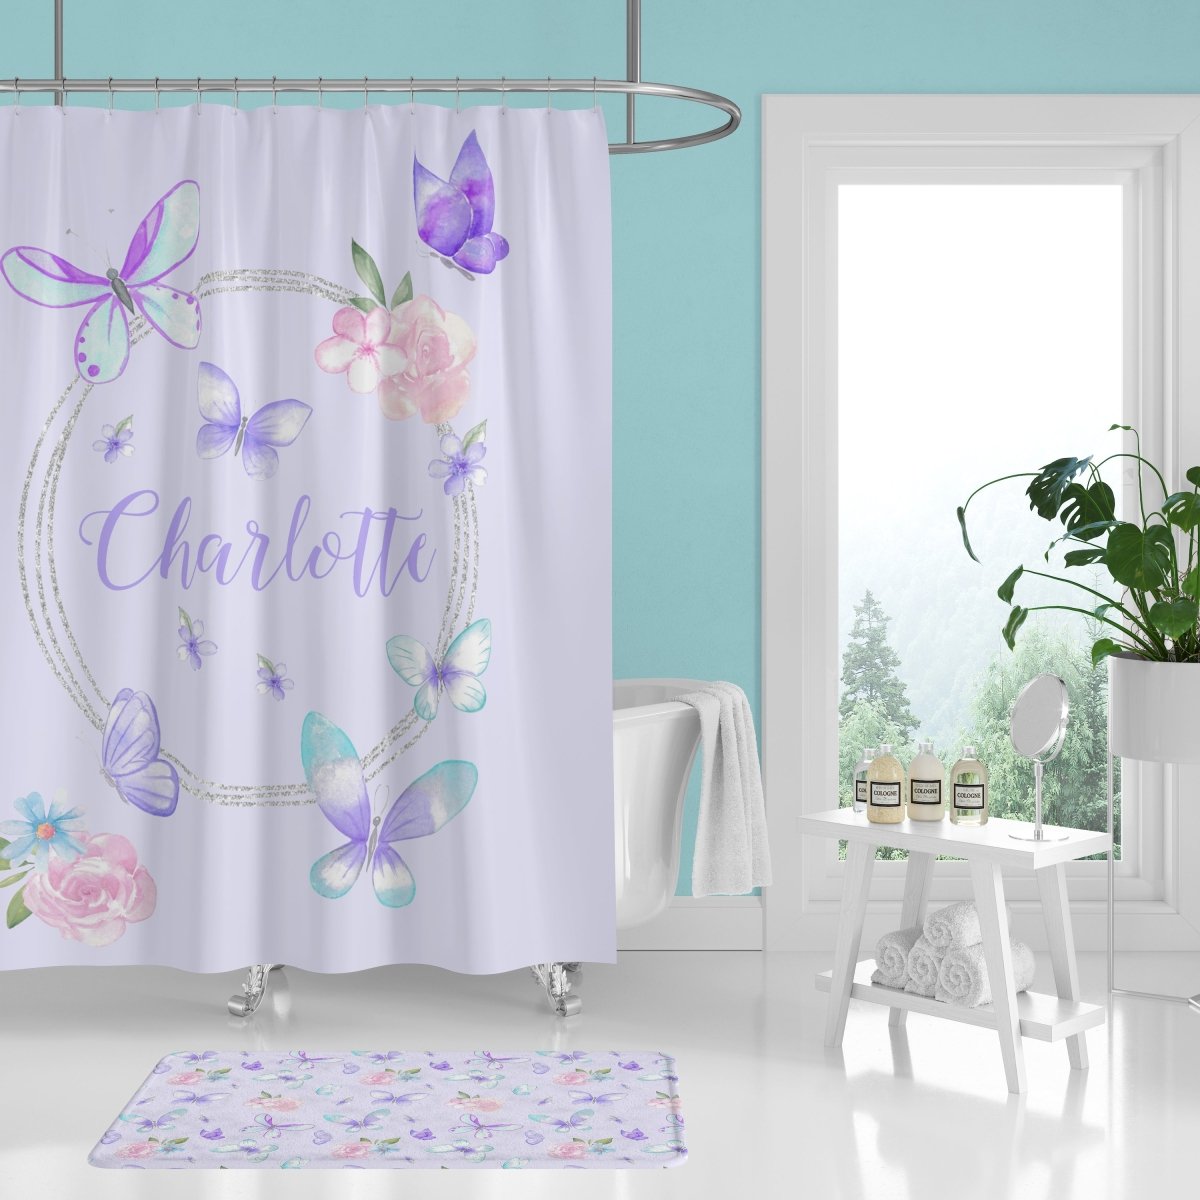 Butterfly Floral Bathroom Collection - Butterfly Floral, gender_girl, Theme_Butterfly